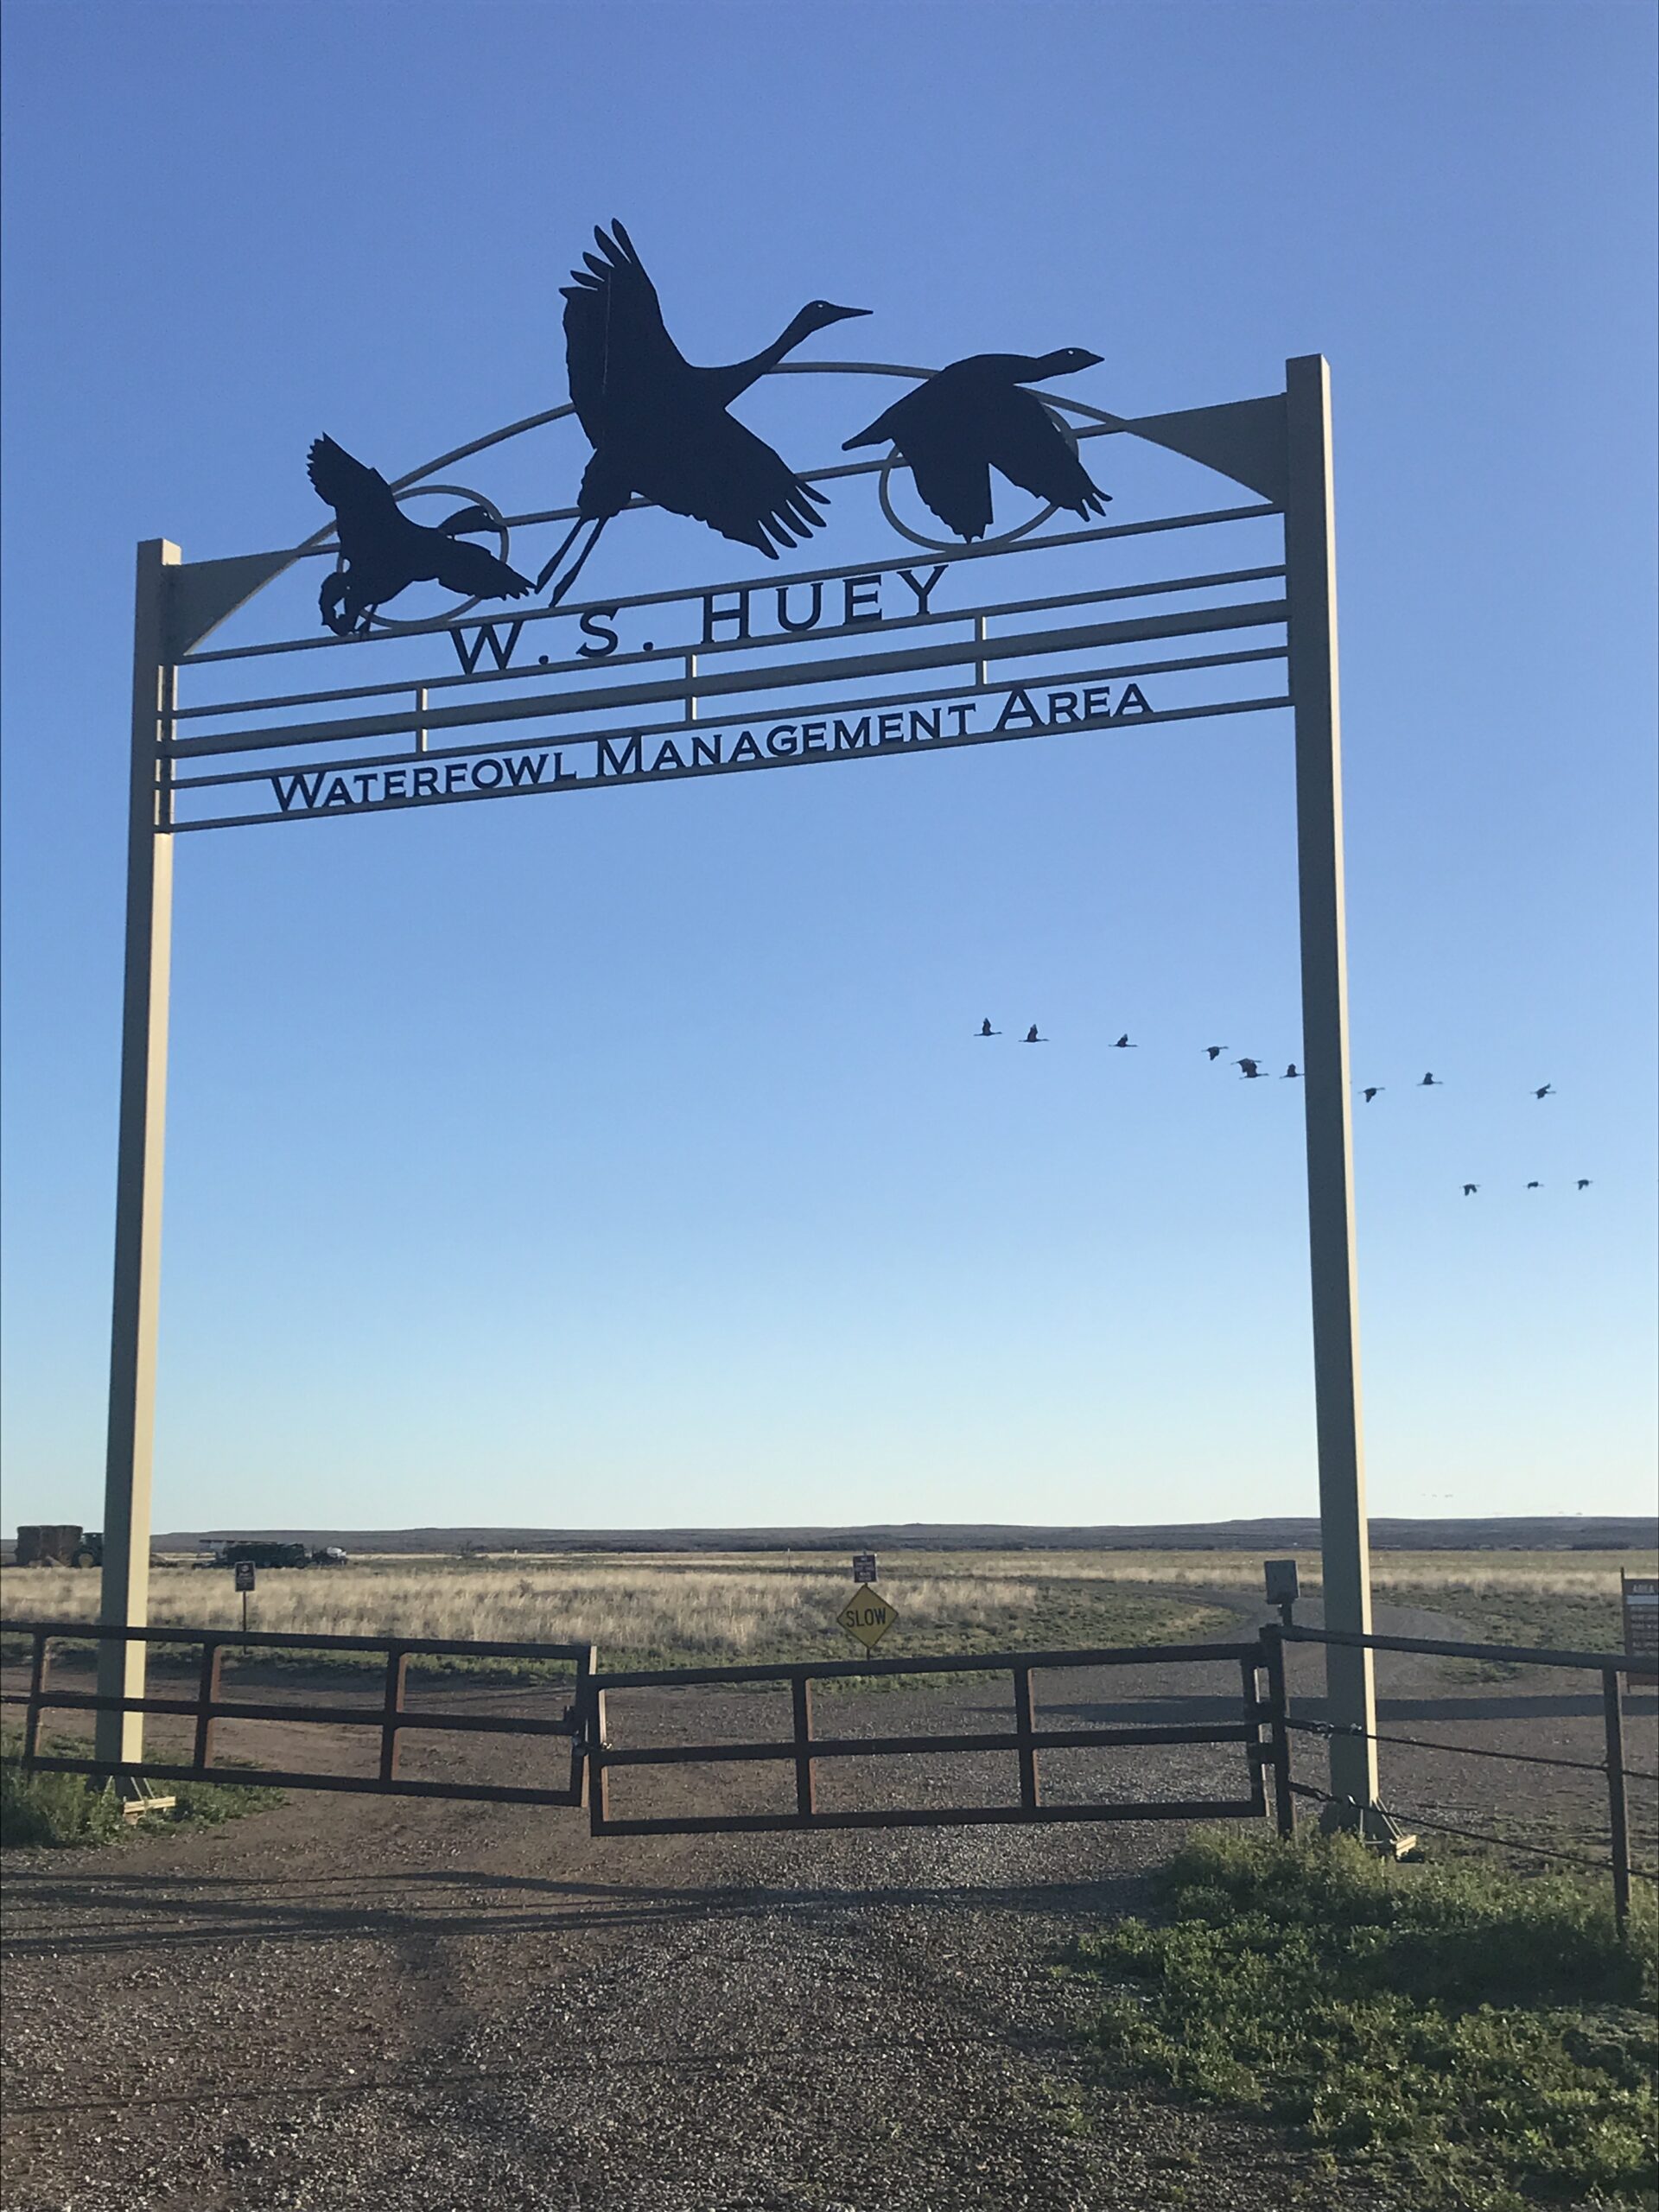 The W.S. Huey Waterfowl Management Area was created in 1986 by the New Mexico State Game and Fish Department to create new habitat for waterfowl.